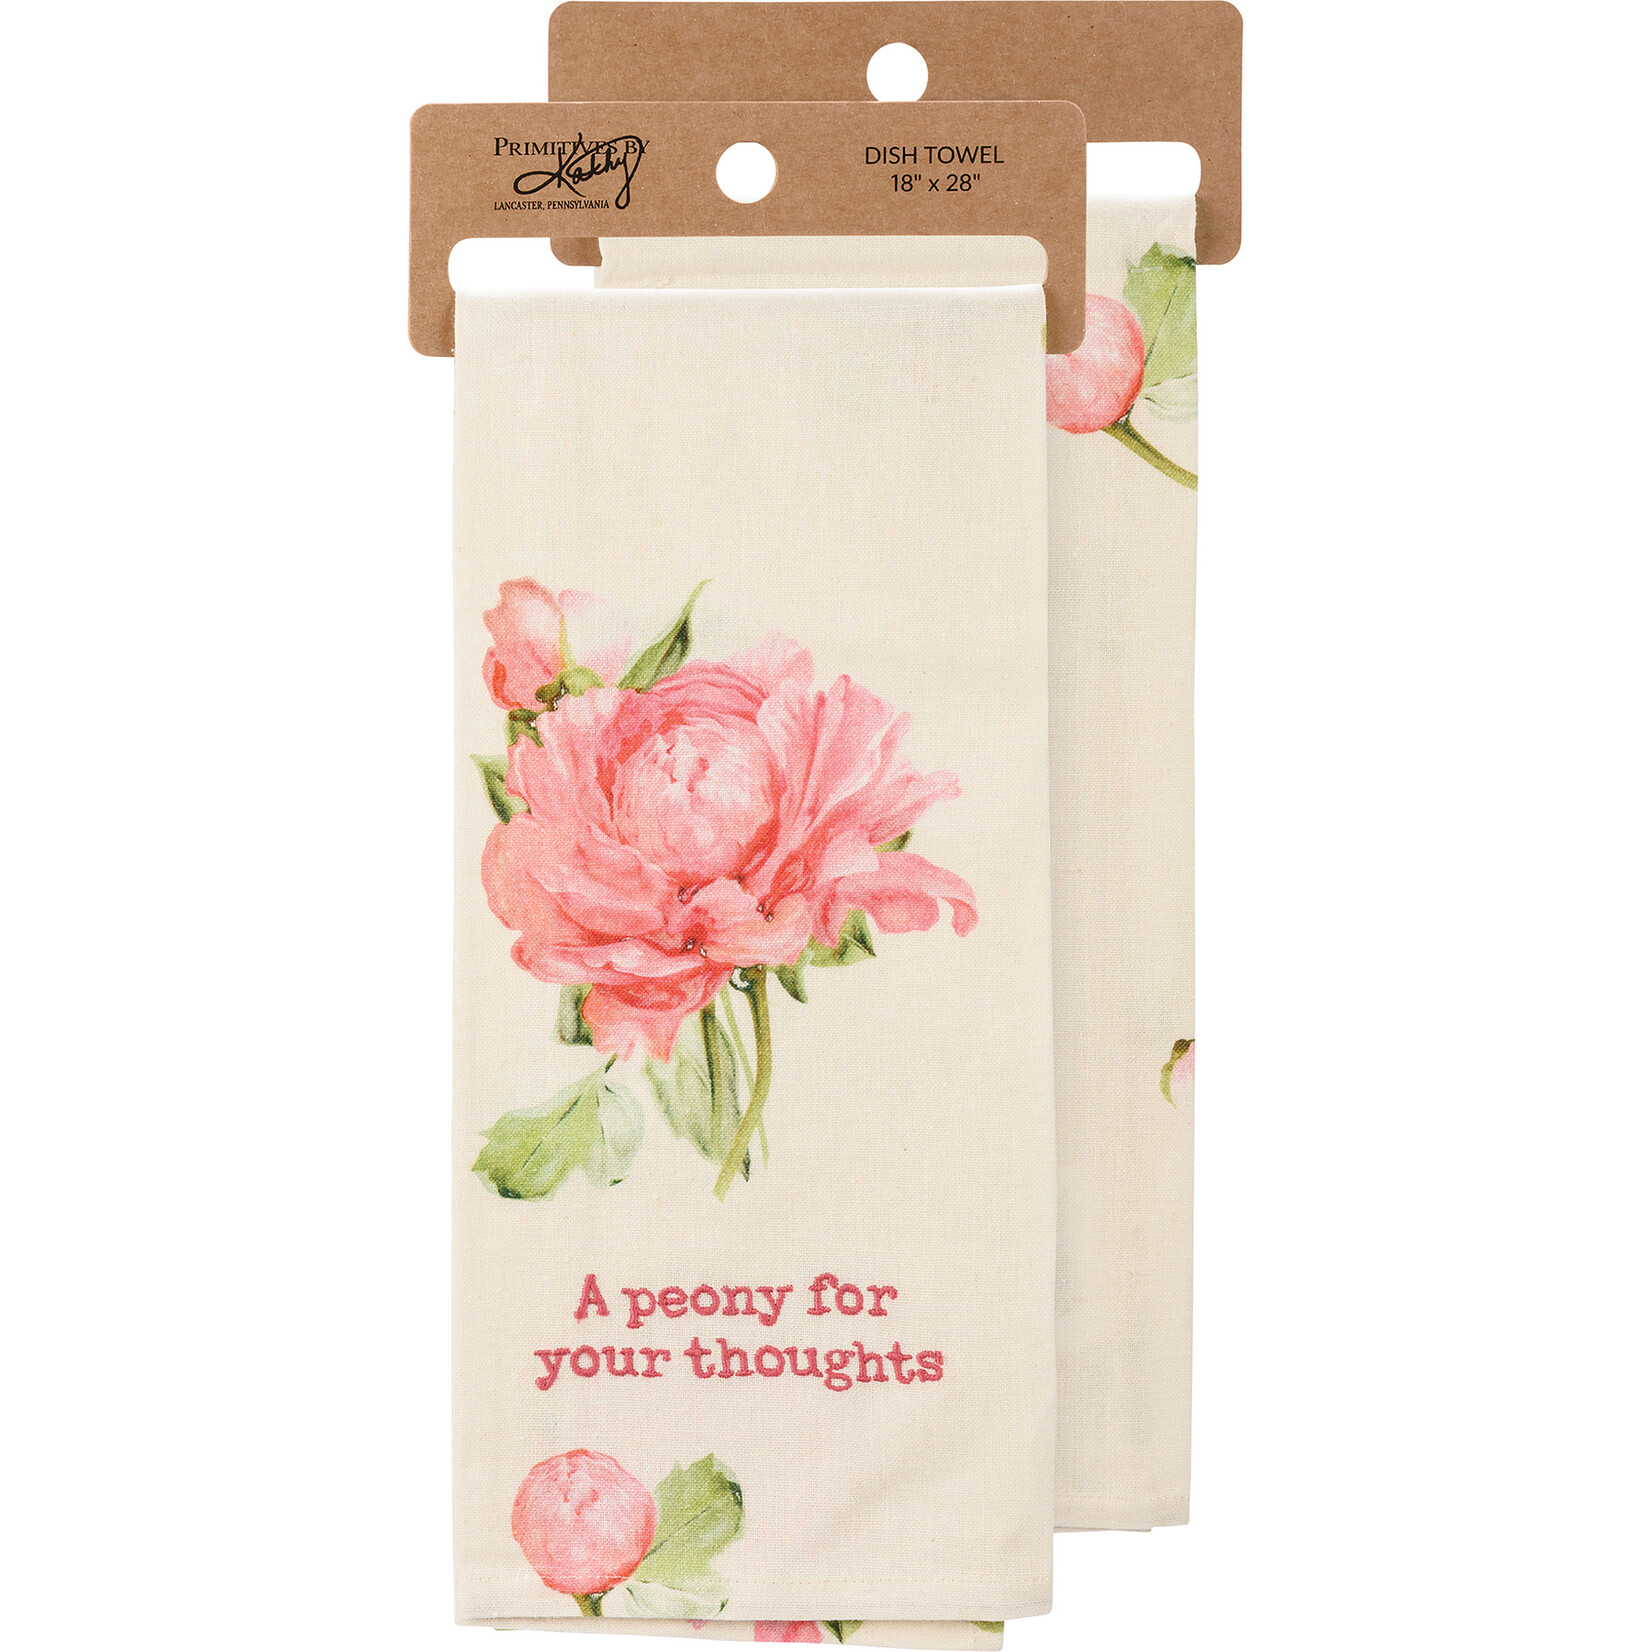 Primitives by Kathy Primitives by Kathy A Peony For Your Thoughts Kitchen Towel